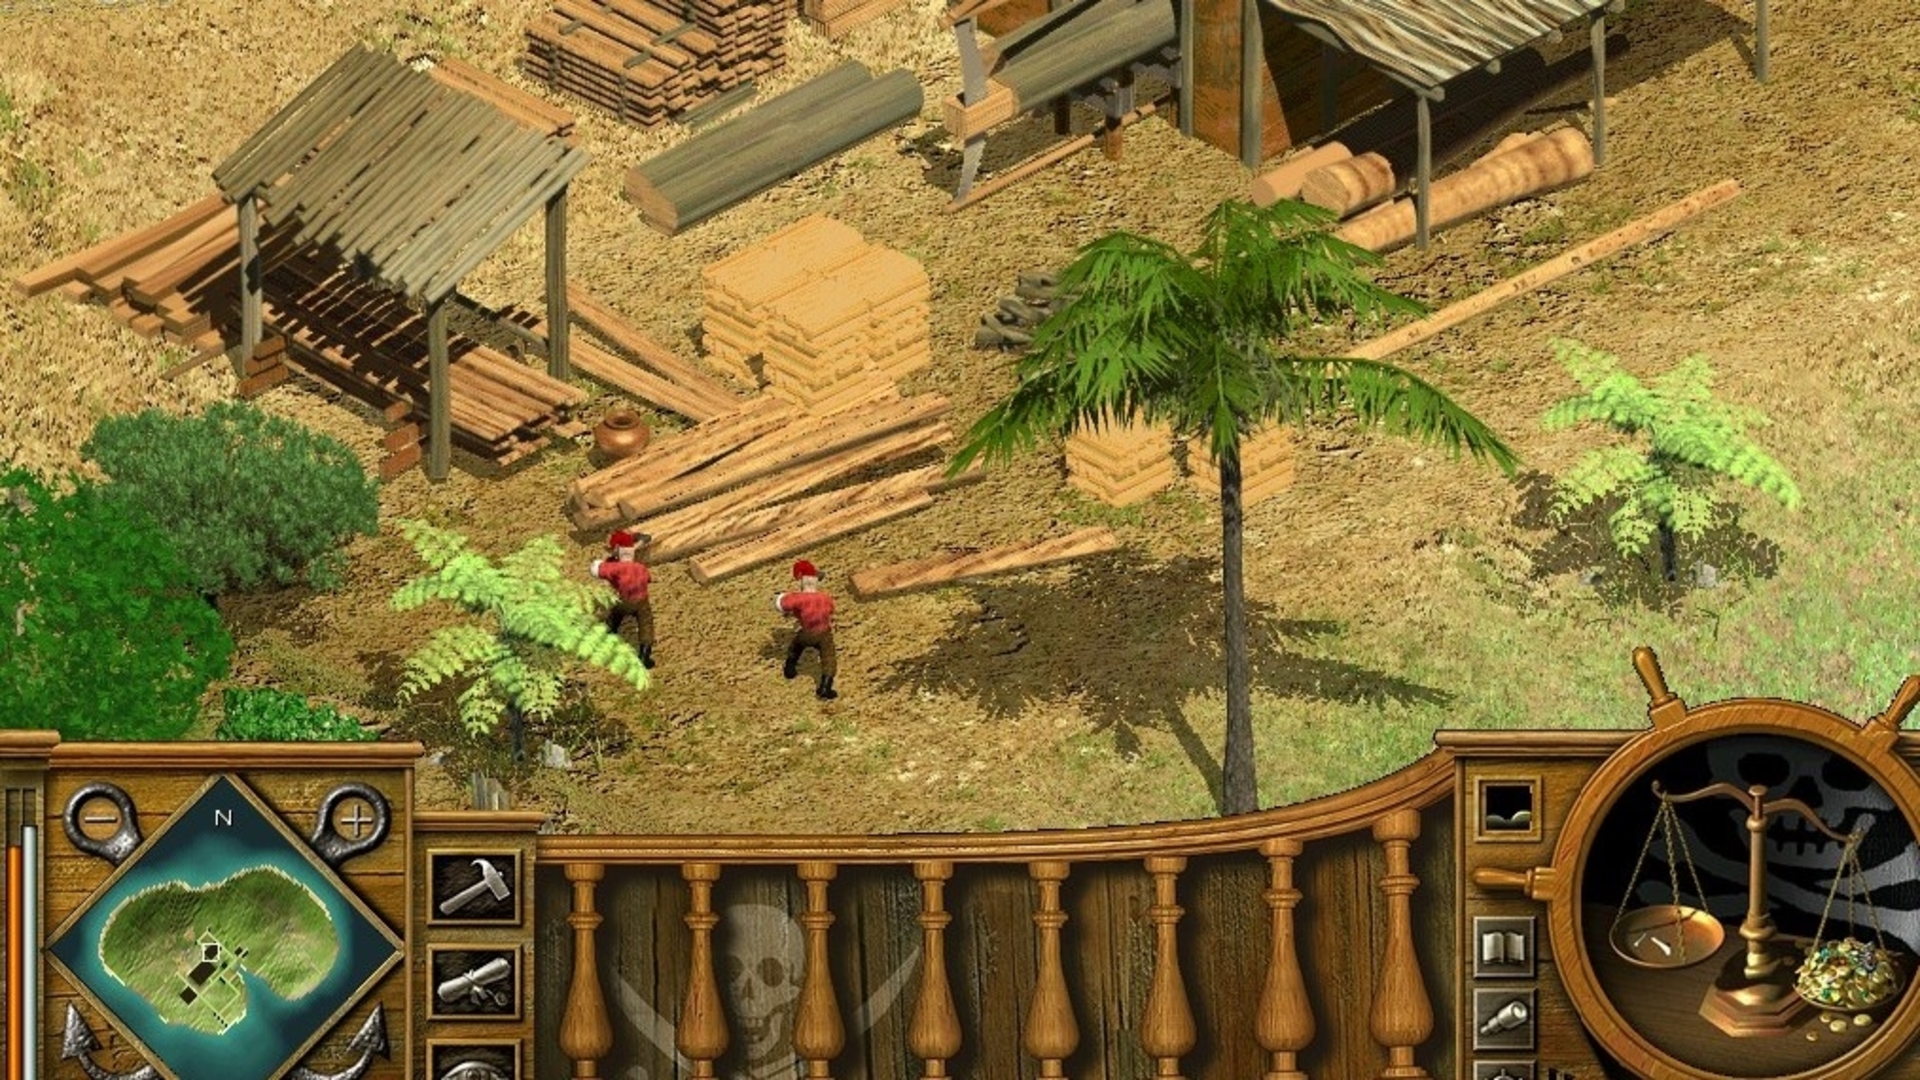 Best Pirate games: two pirates building a shack in Tropico 2 - Pirates Cove.